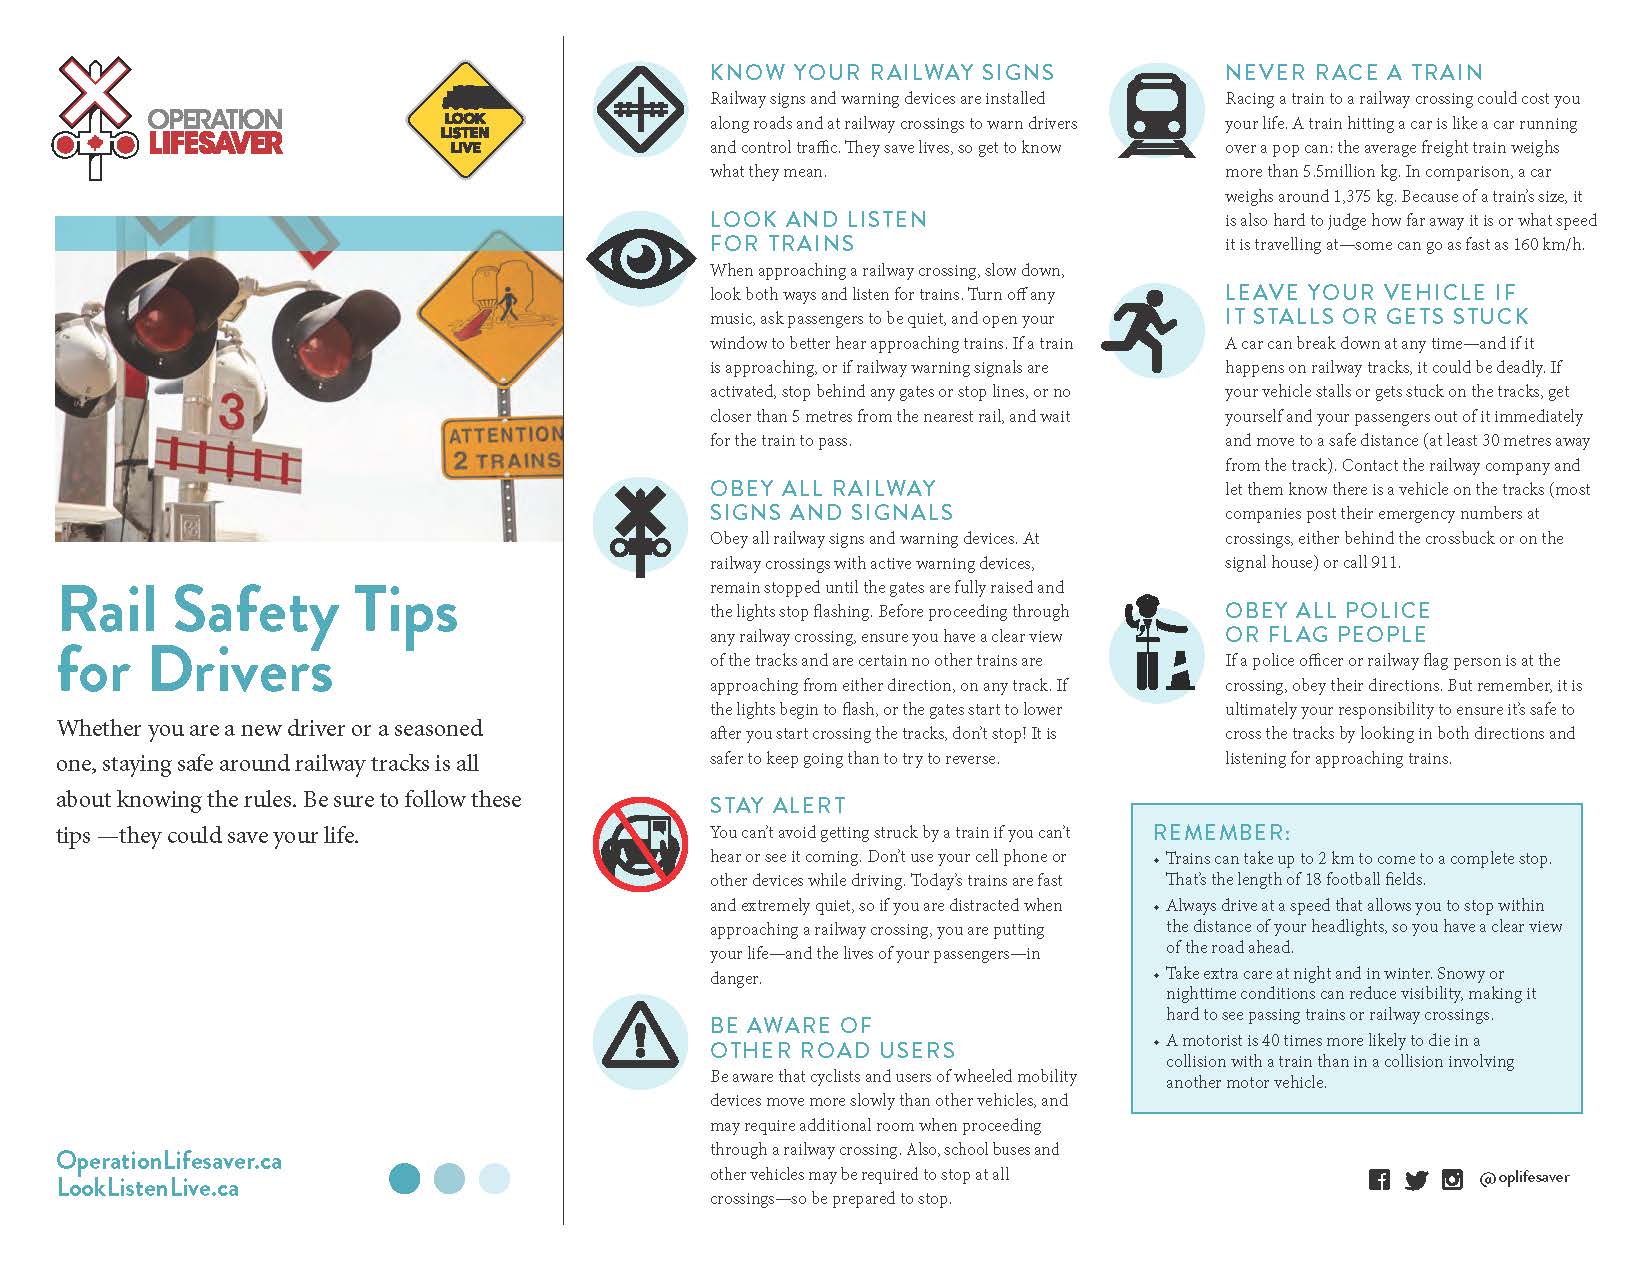 Rail Safety Drivers